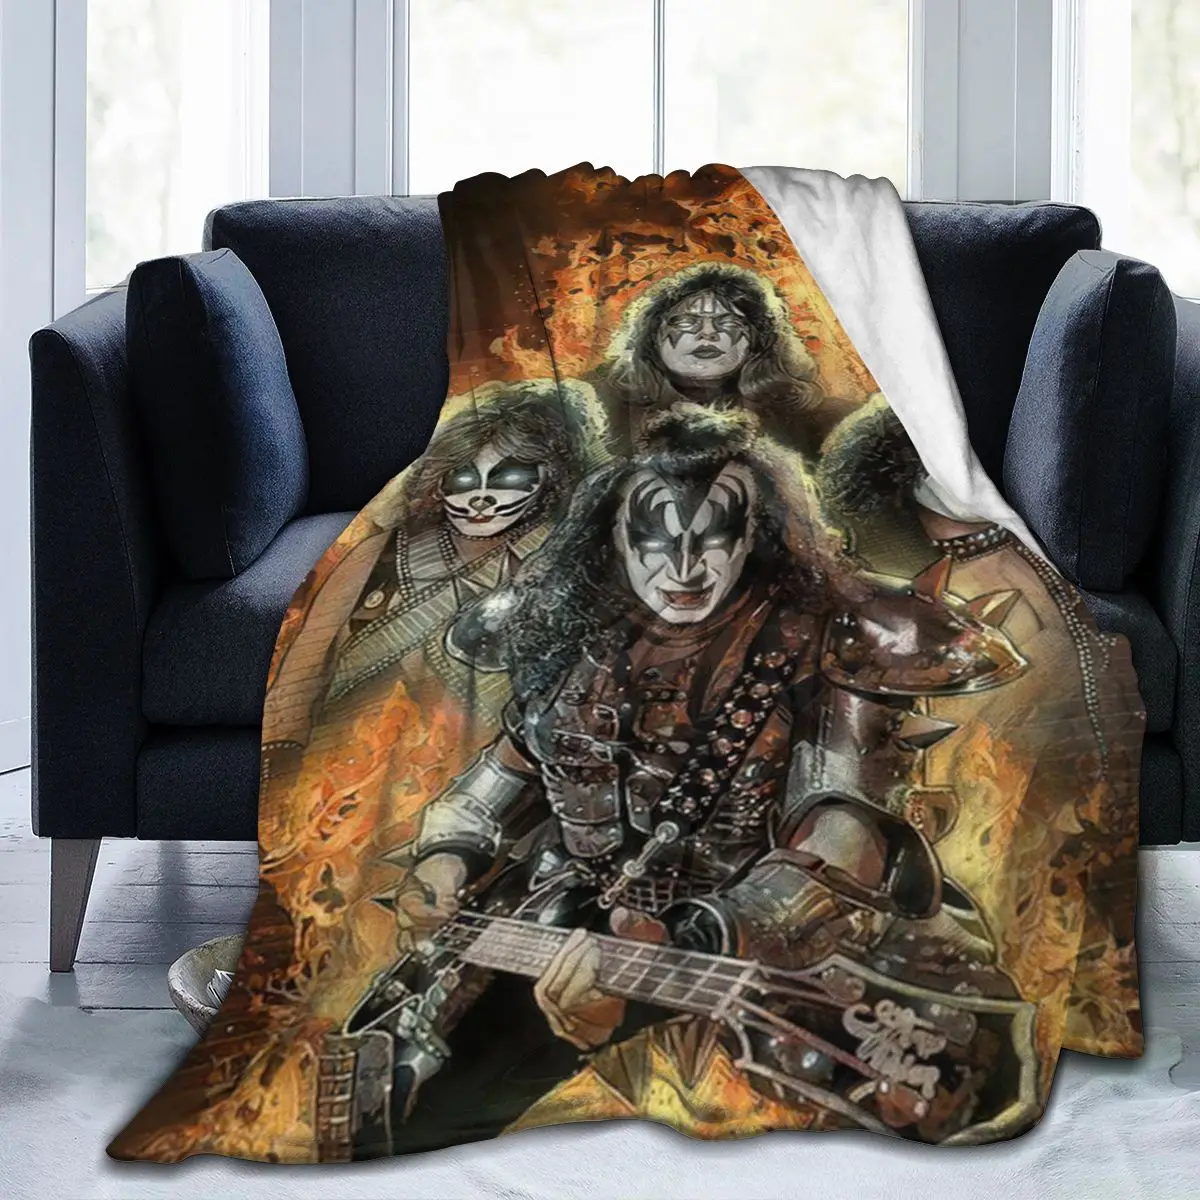 

Ultra Soft Sofa Blanket Cover Blanket Cartoon Cartoon Bedding Flannel plied Sofa Bedroom Decor for Children and Adults 278696286